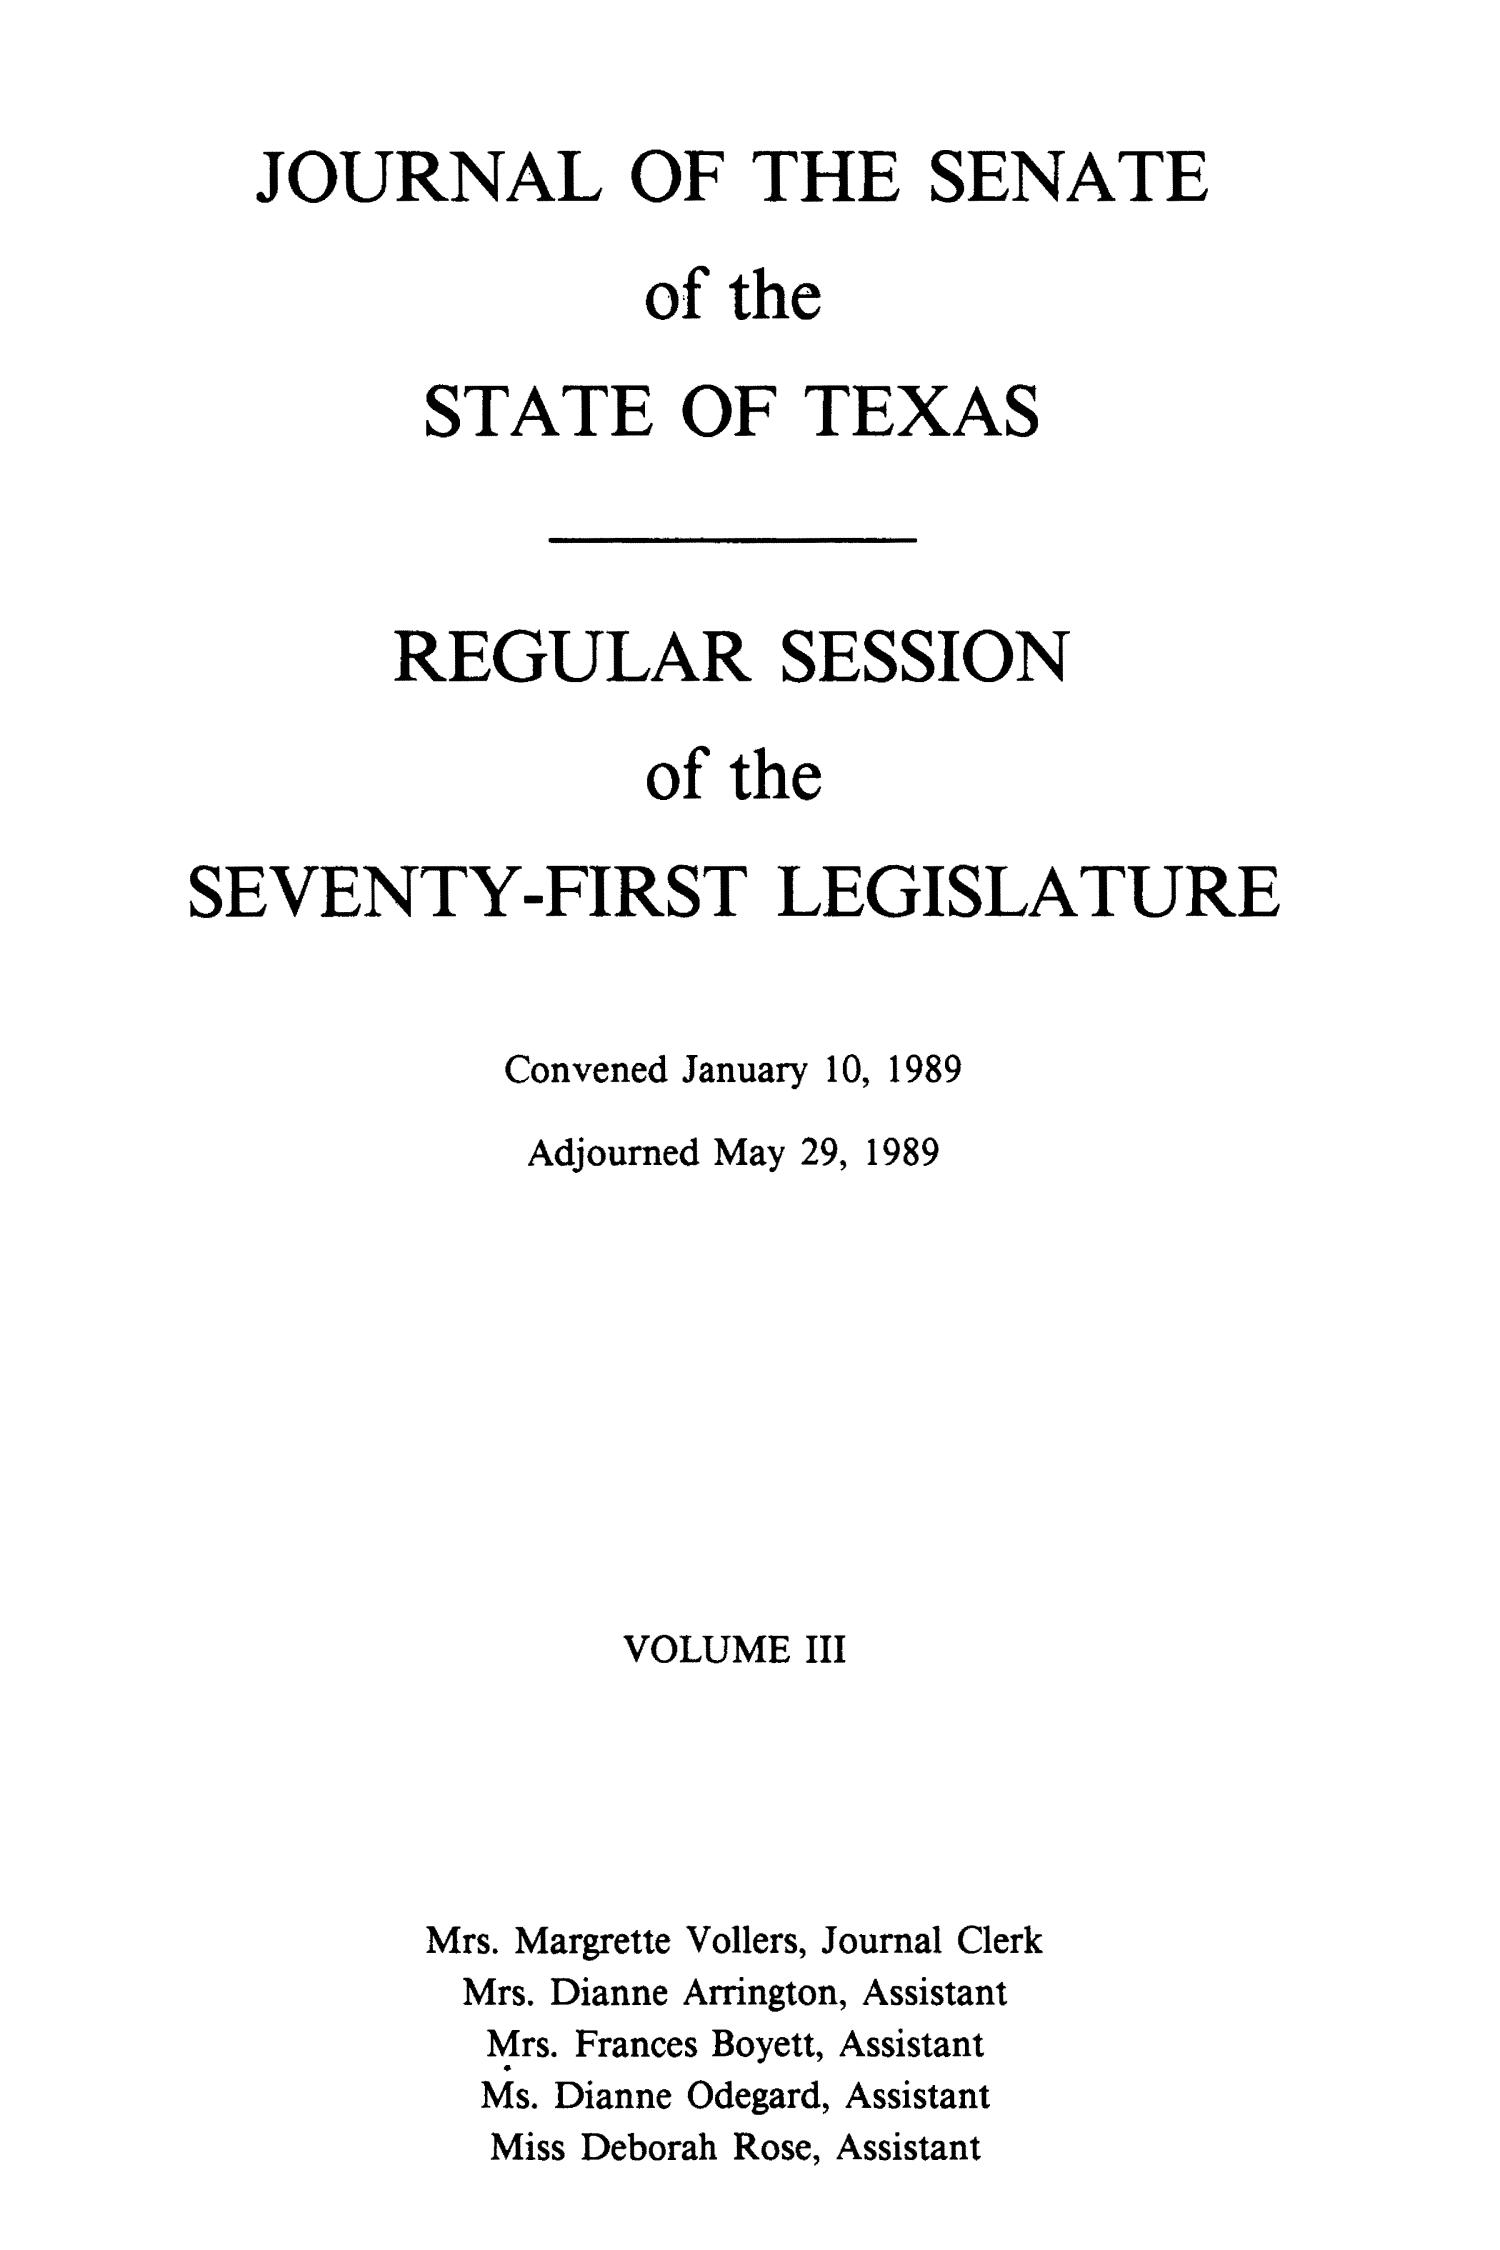 Journal of the Senate of the State of Texas, Regular Session of the Seventy-First Legislature, Volume 3
                                                
                                                    Title Page
                                                